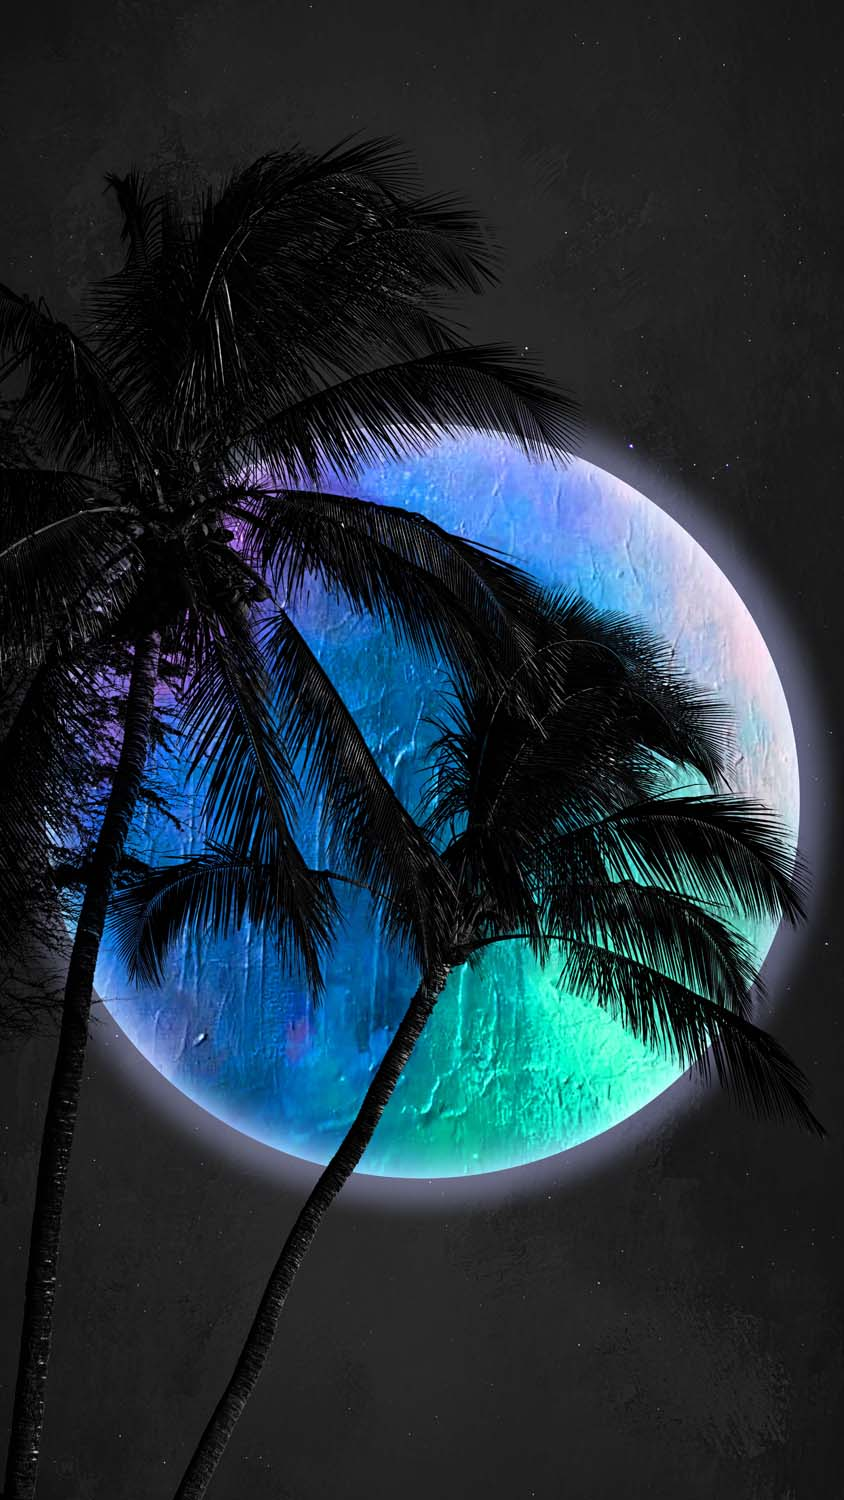 Palm Trees And Moon IPhone Wallpaper HD  IPhone Wallpapers